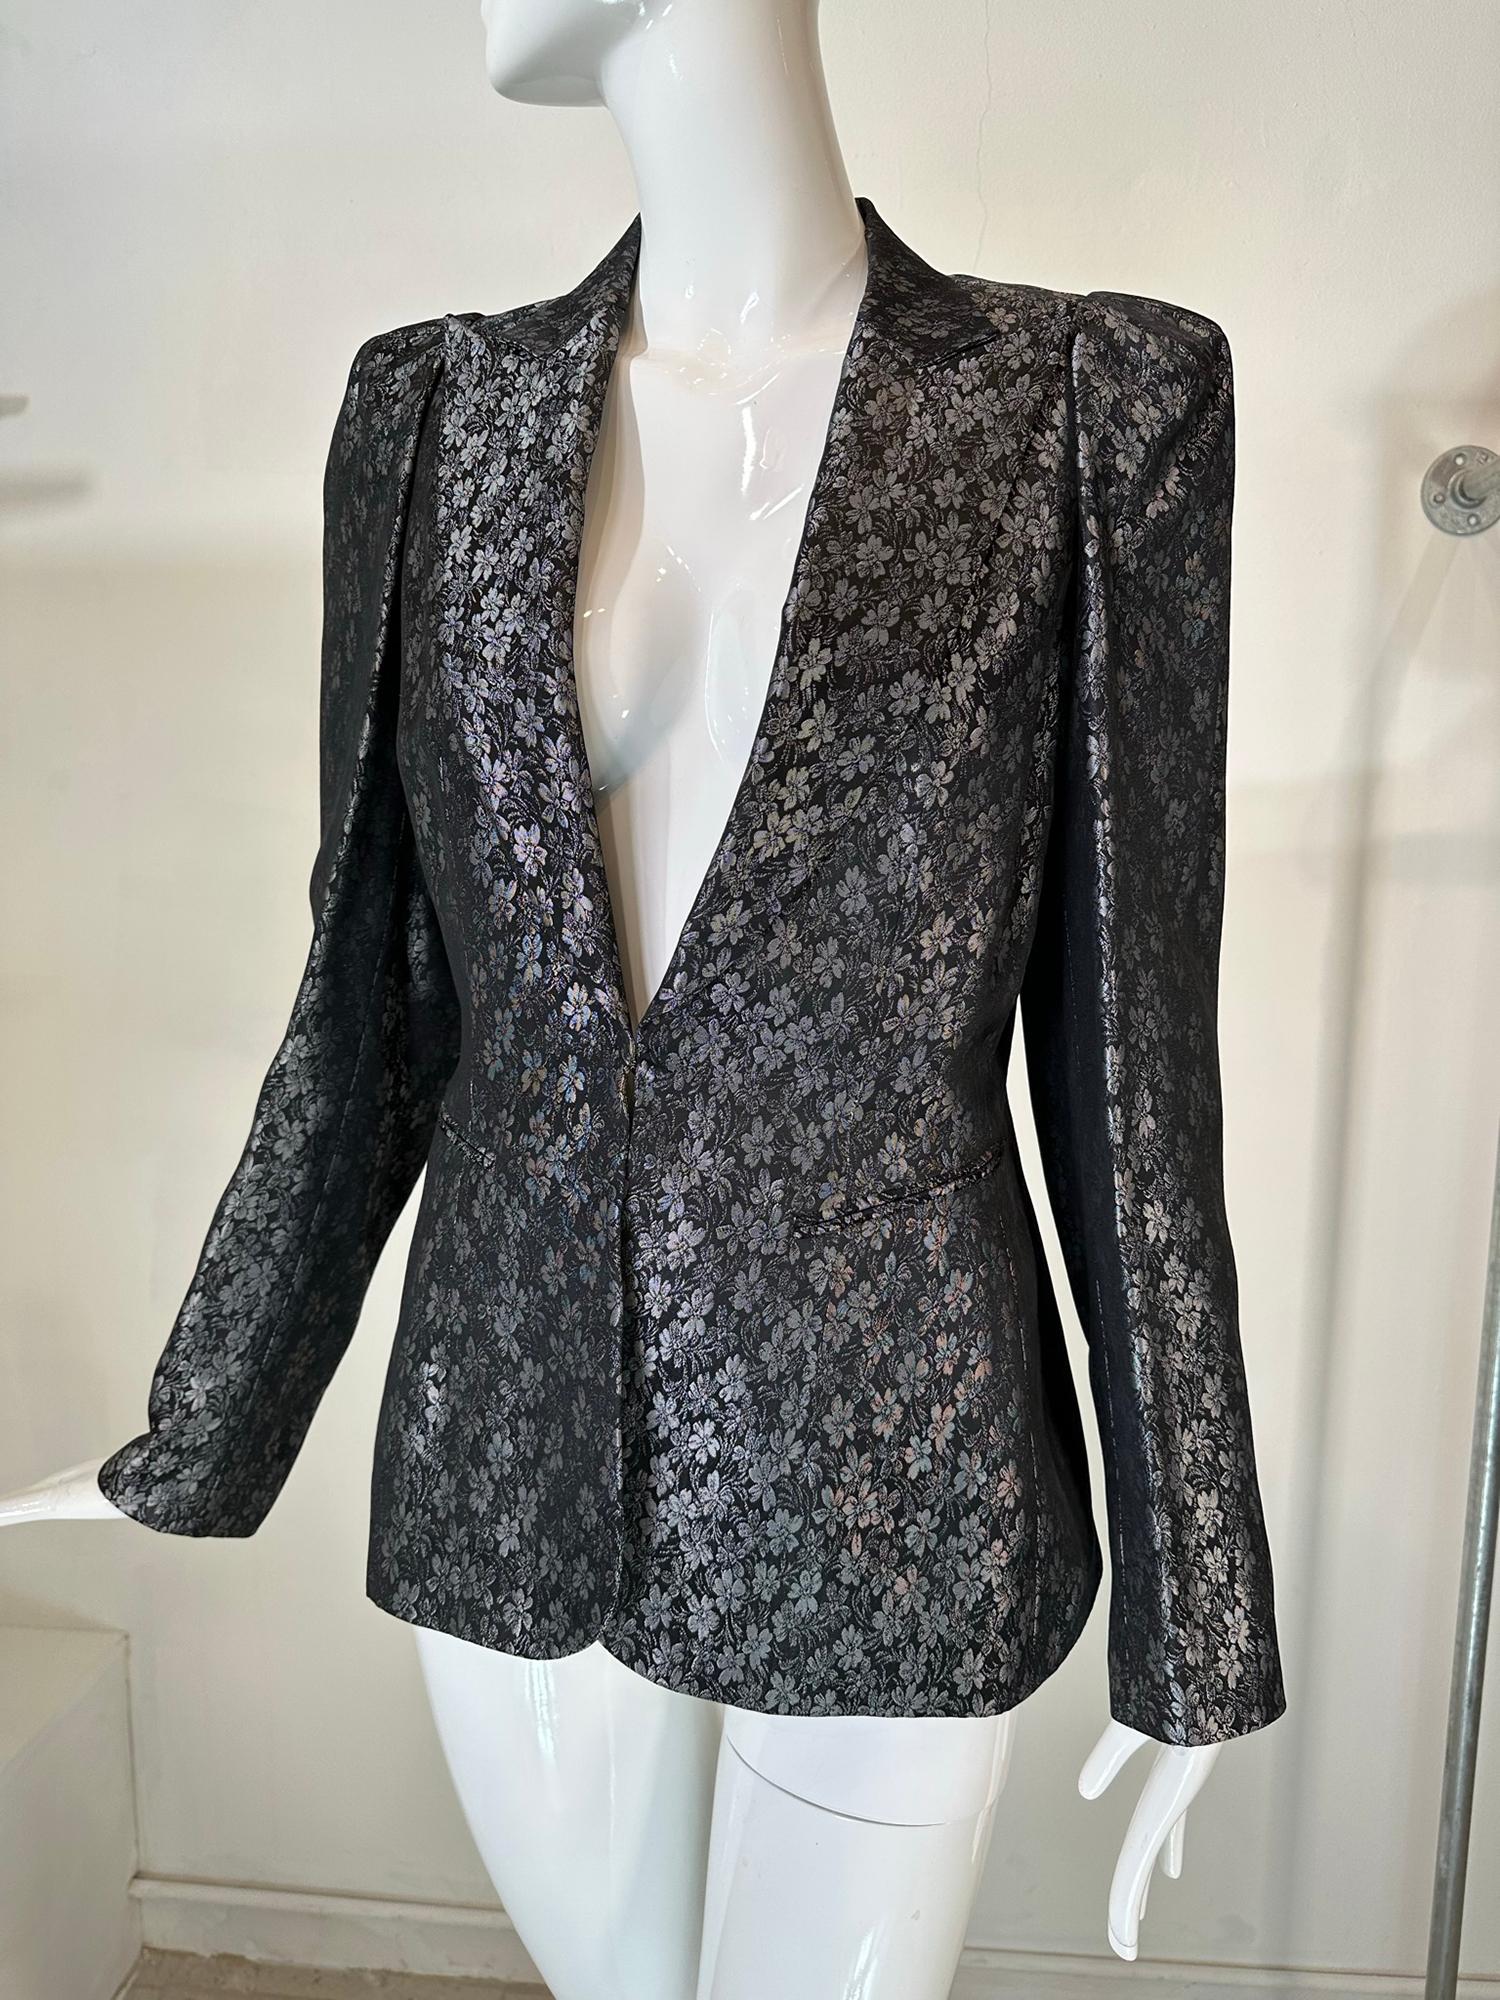 Richard Tyler Black & Silver Brocade Tailored Single Breasted Jacket 1990s For Sale 8